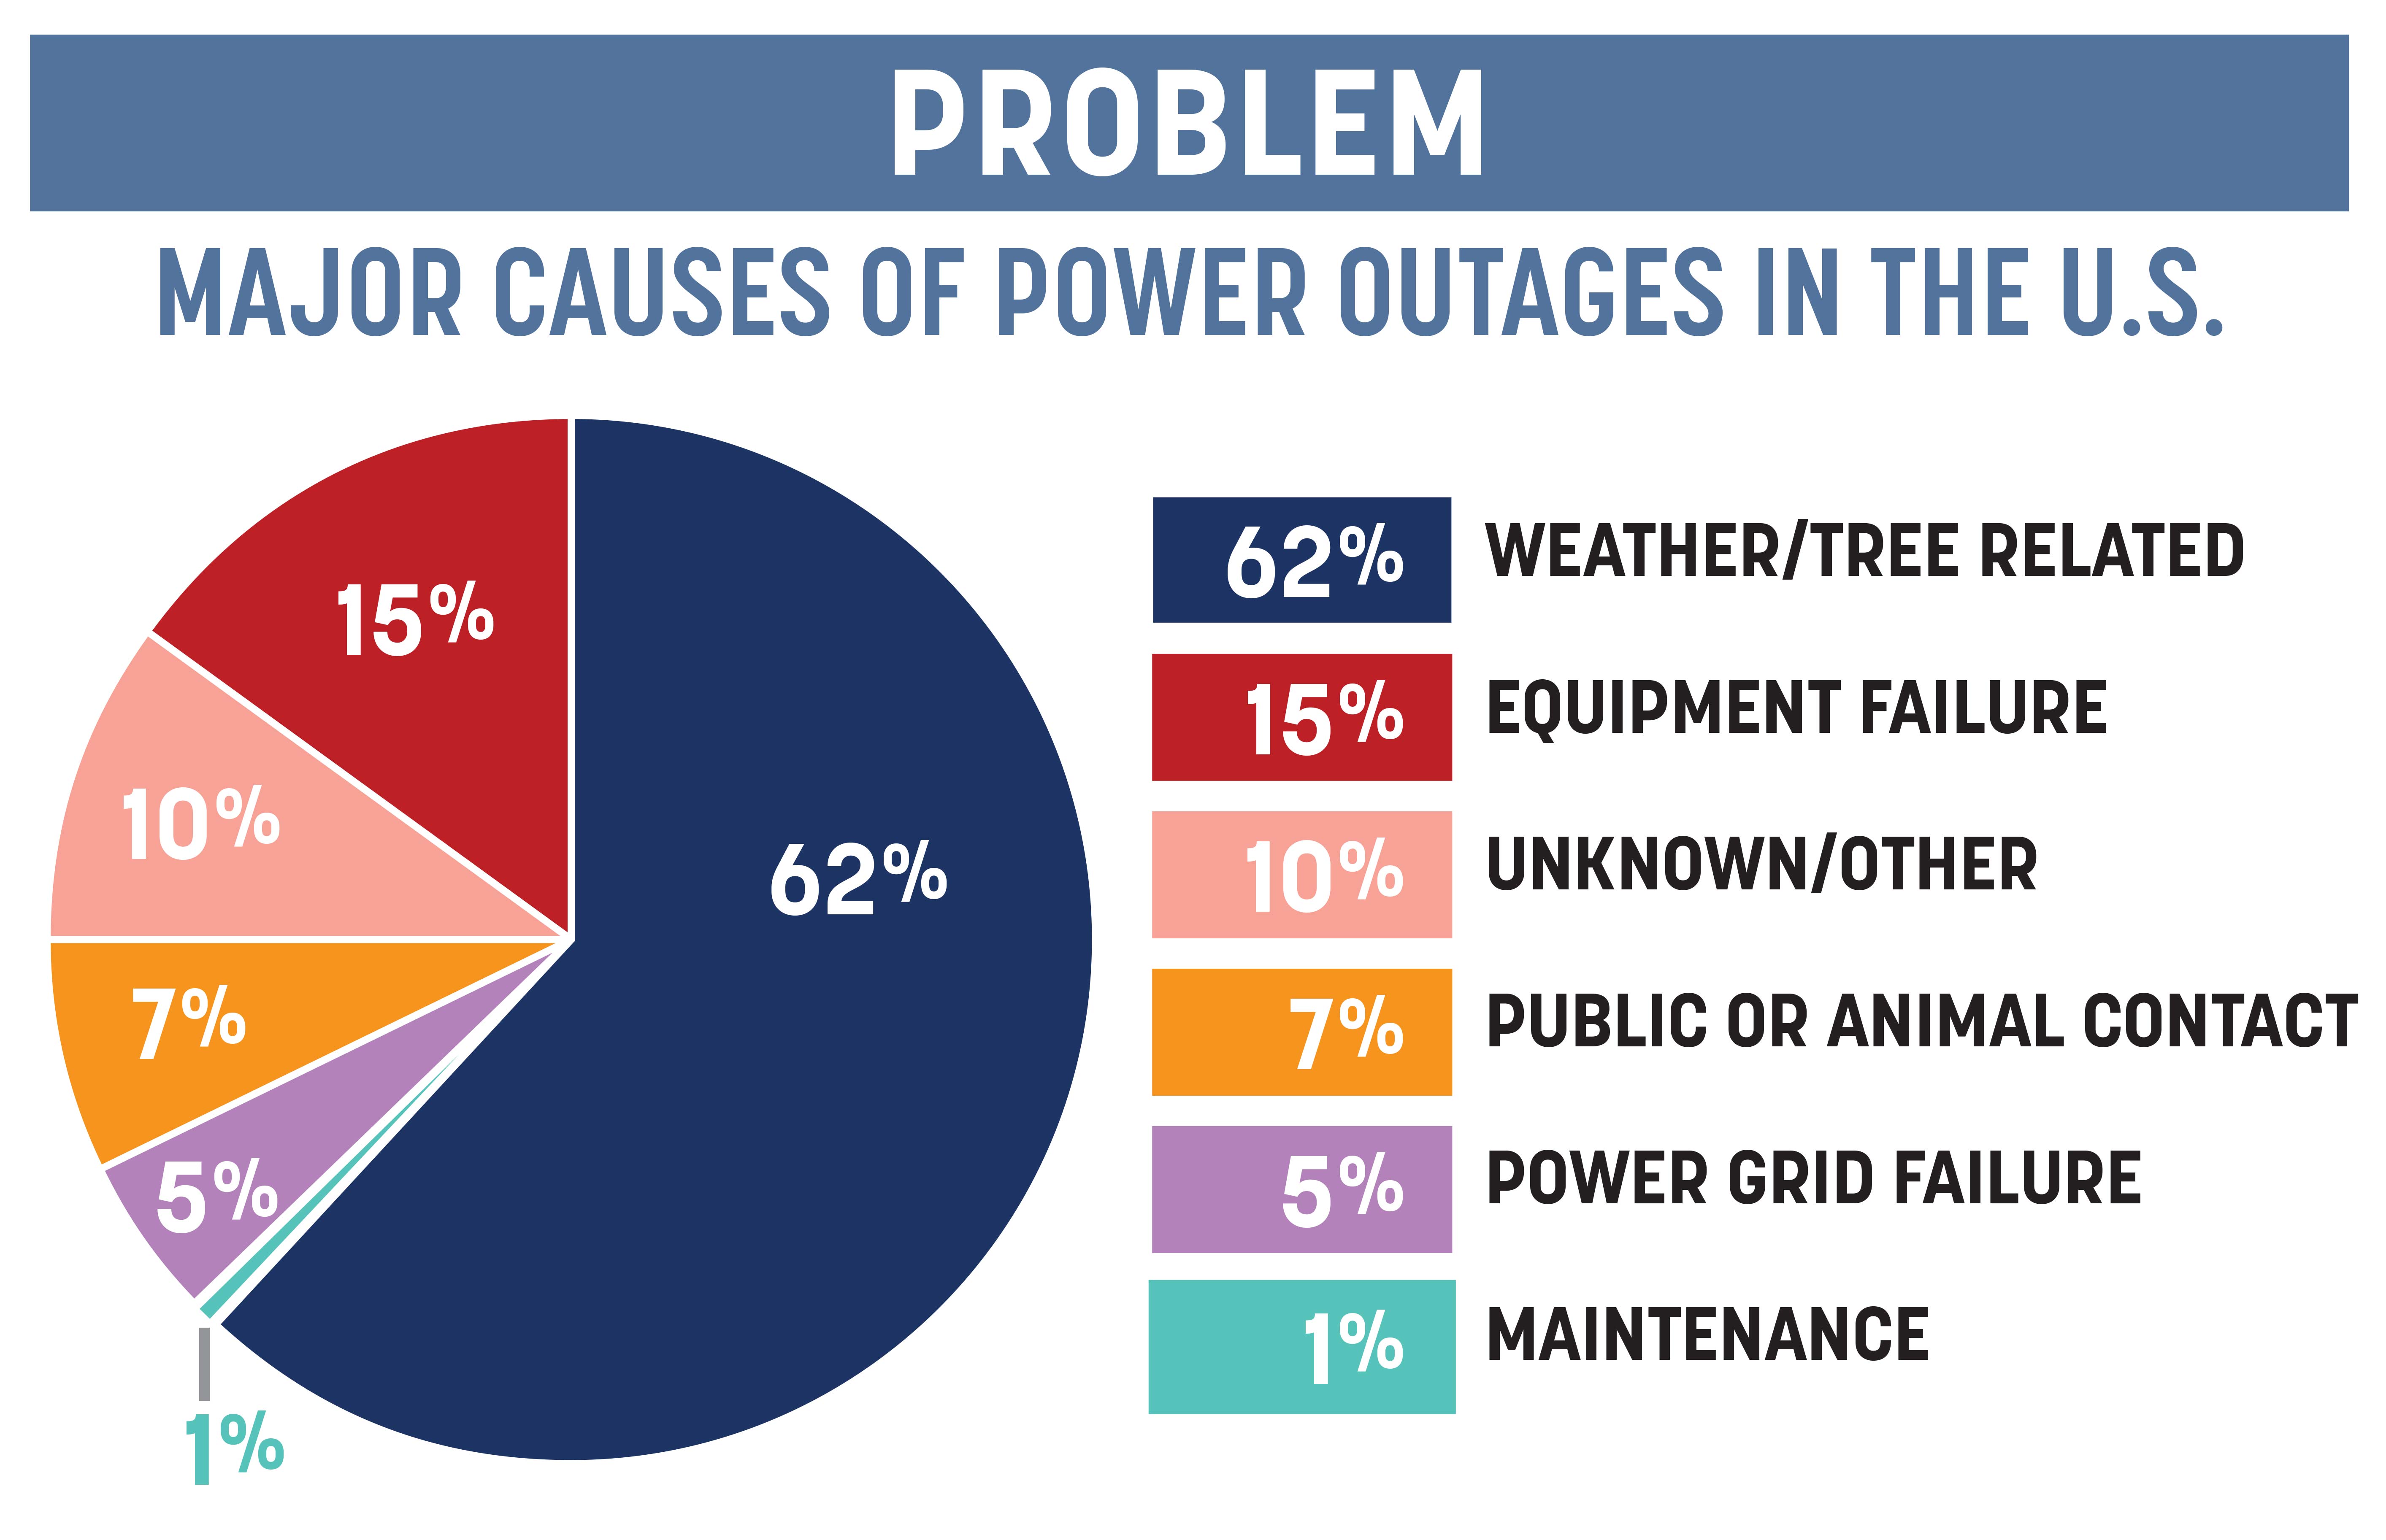 Pie chart describing the main causes of power outages: 62% weather/tree related, 15% equipment failure; 10% unknown/other; 7% public or animal contact; 5% power grid failure; 1% maintenance.